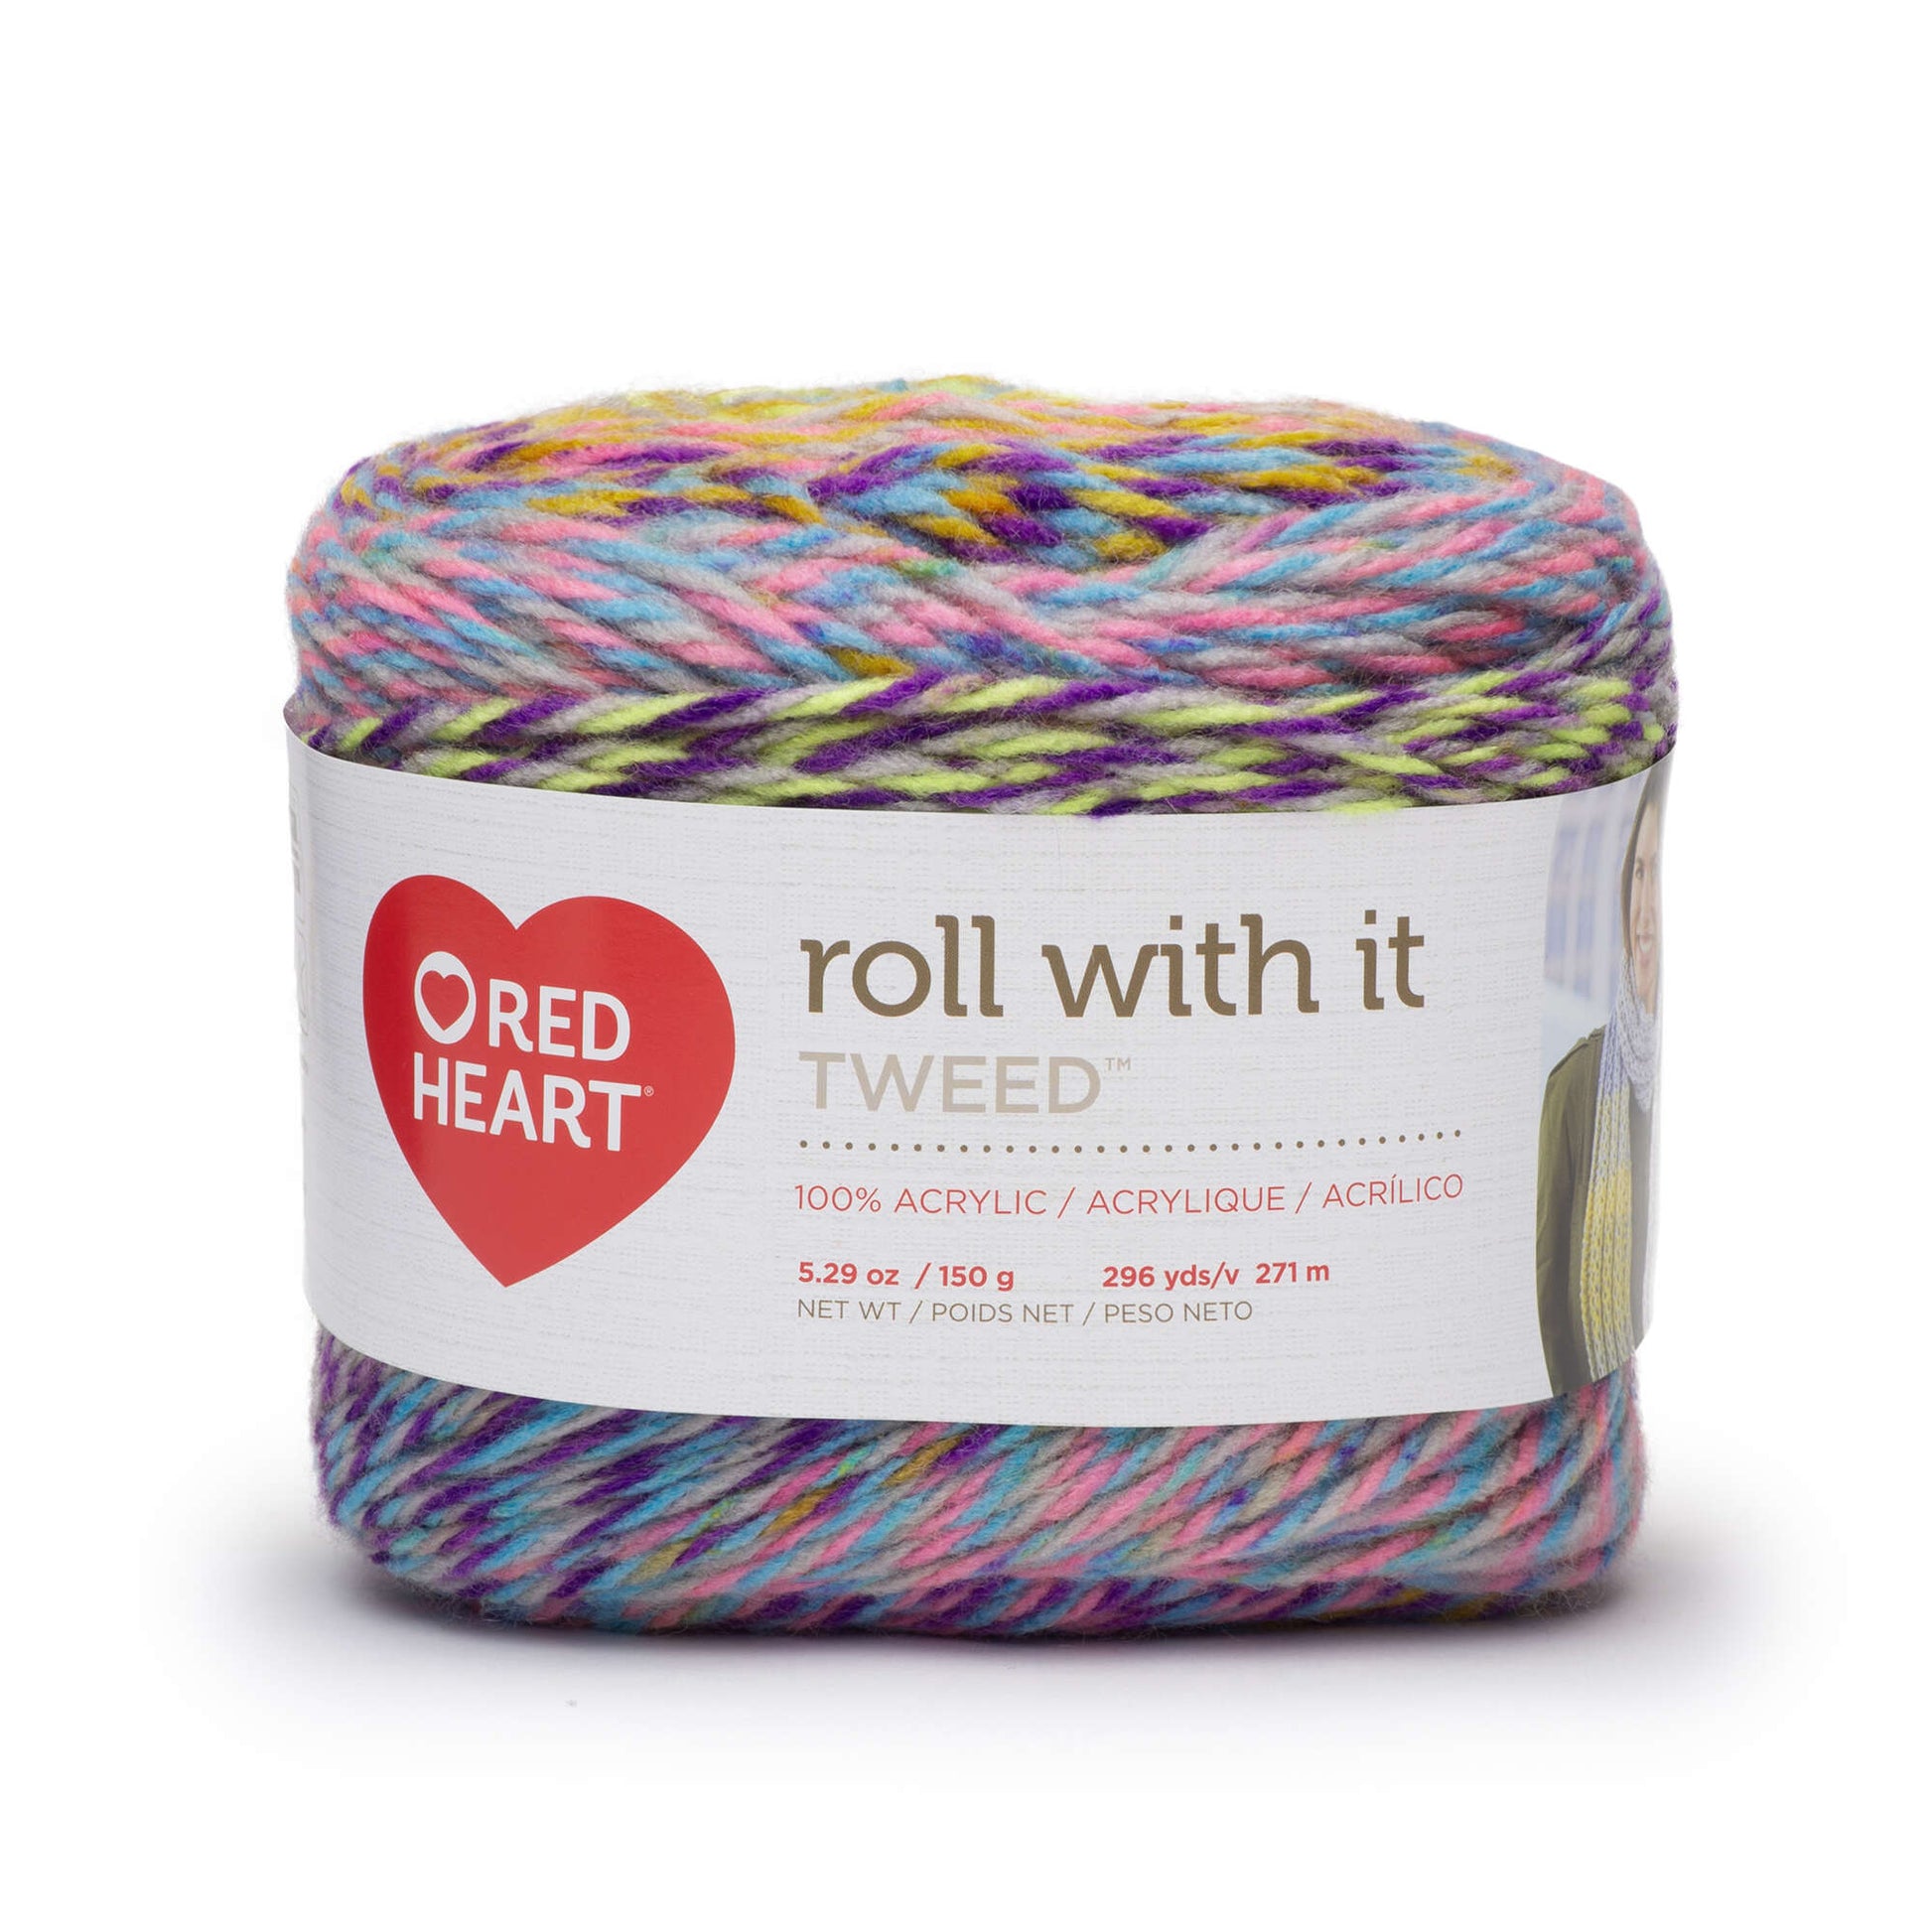 Red Heart Roll With It Tweed Yarn - Clearance shades Party Mix